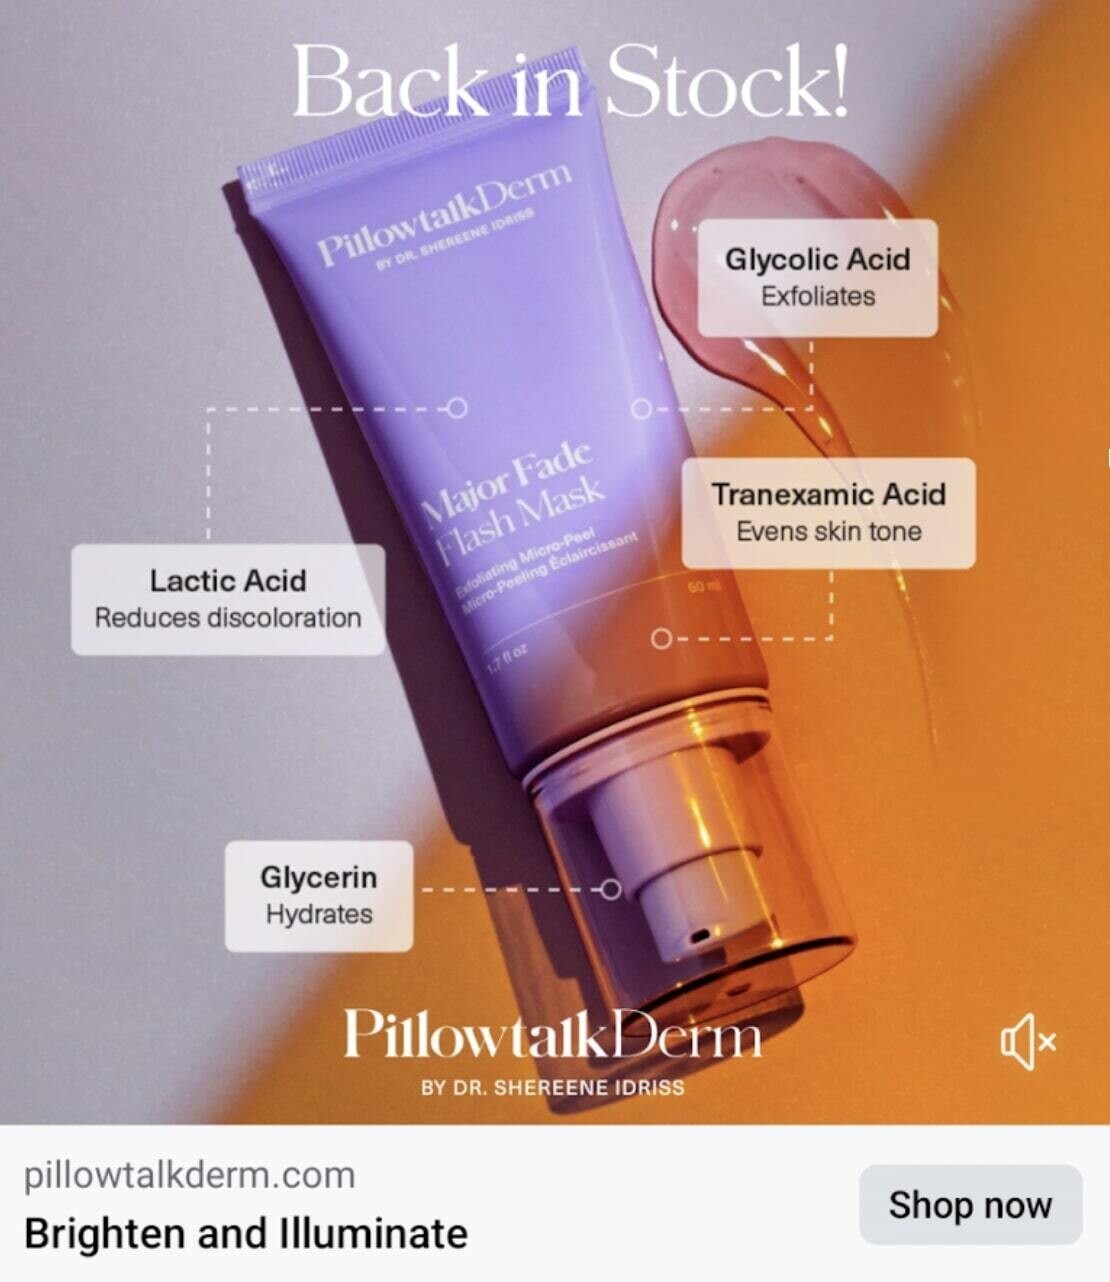 an example of an ad for a mask from PillowtalkDerm